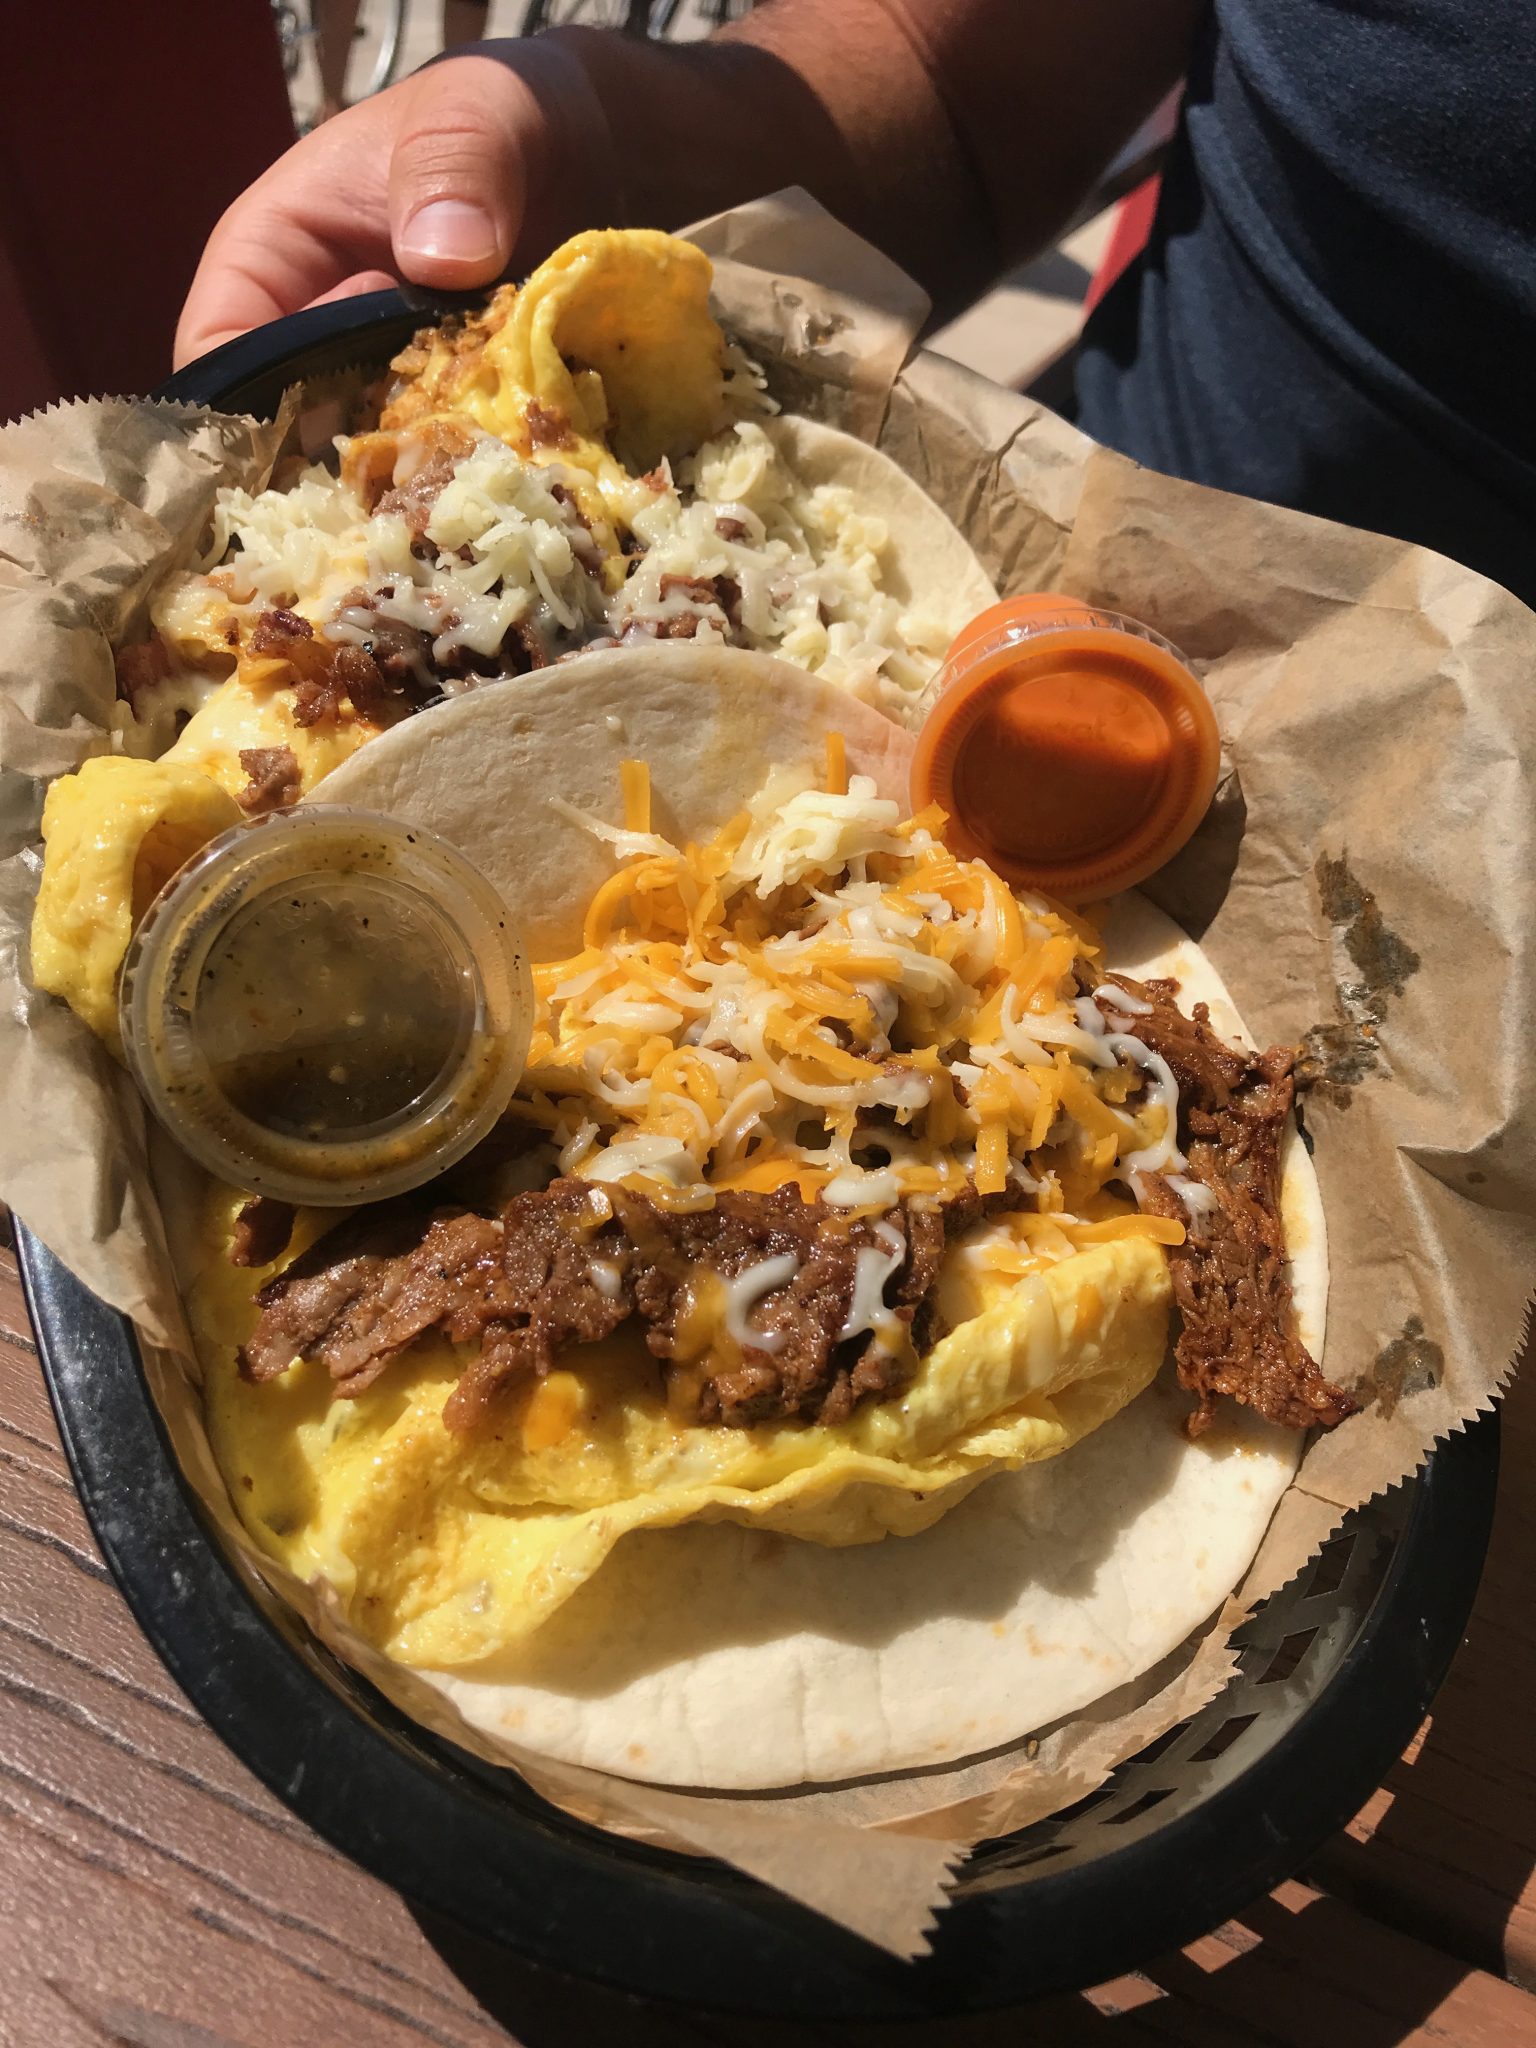 Austin Texas Travel Guide and Itinerary 4 days torchys tacos